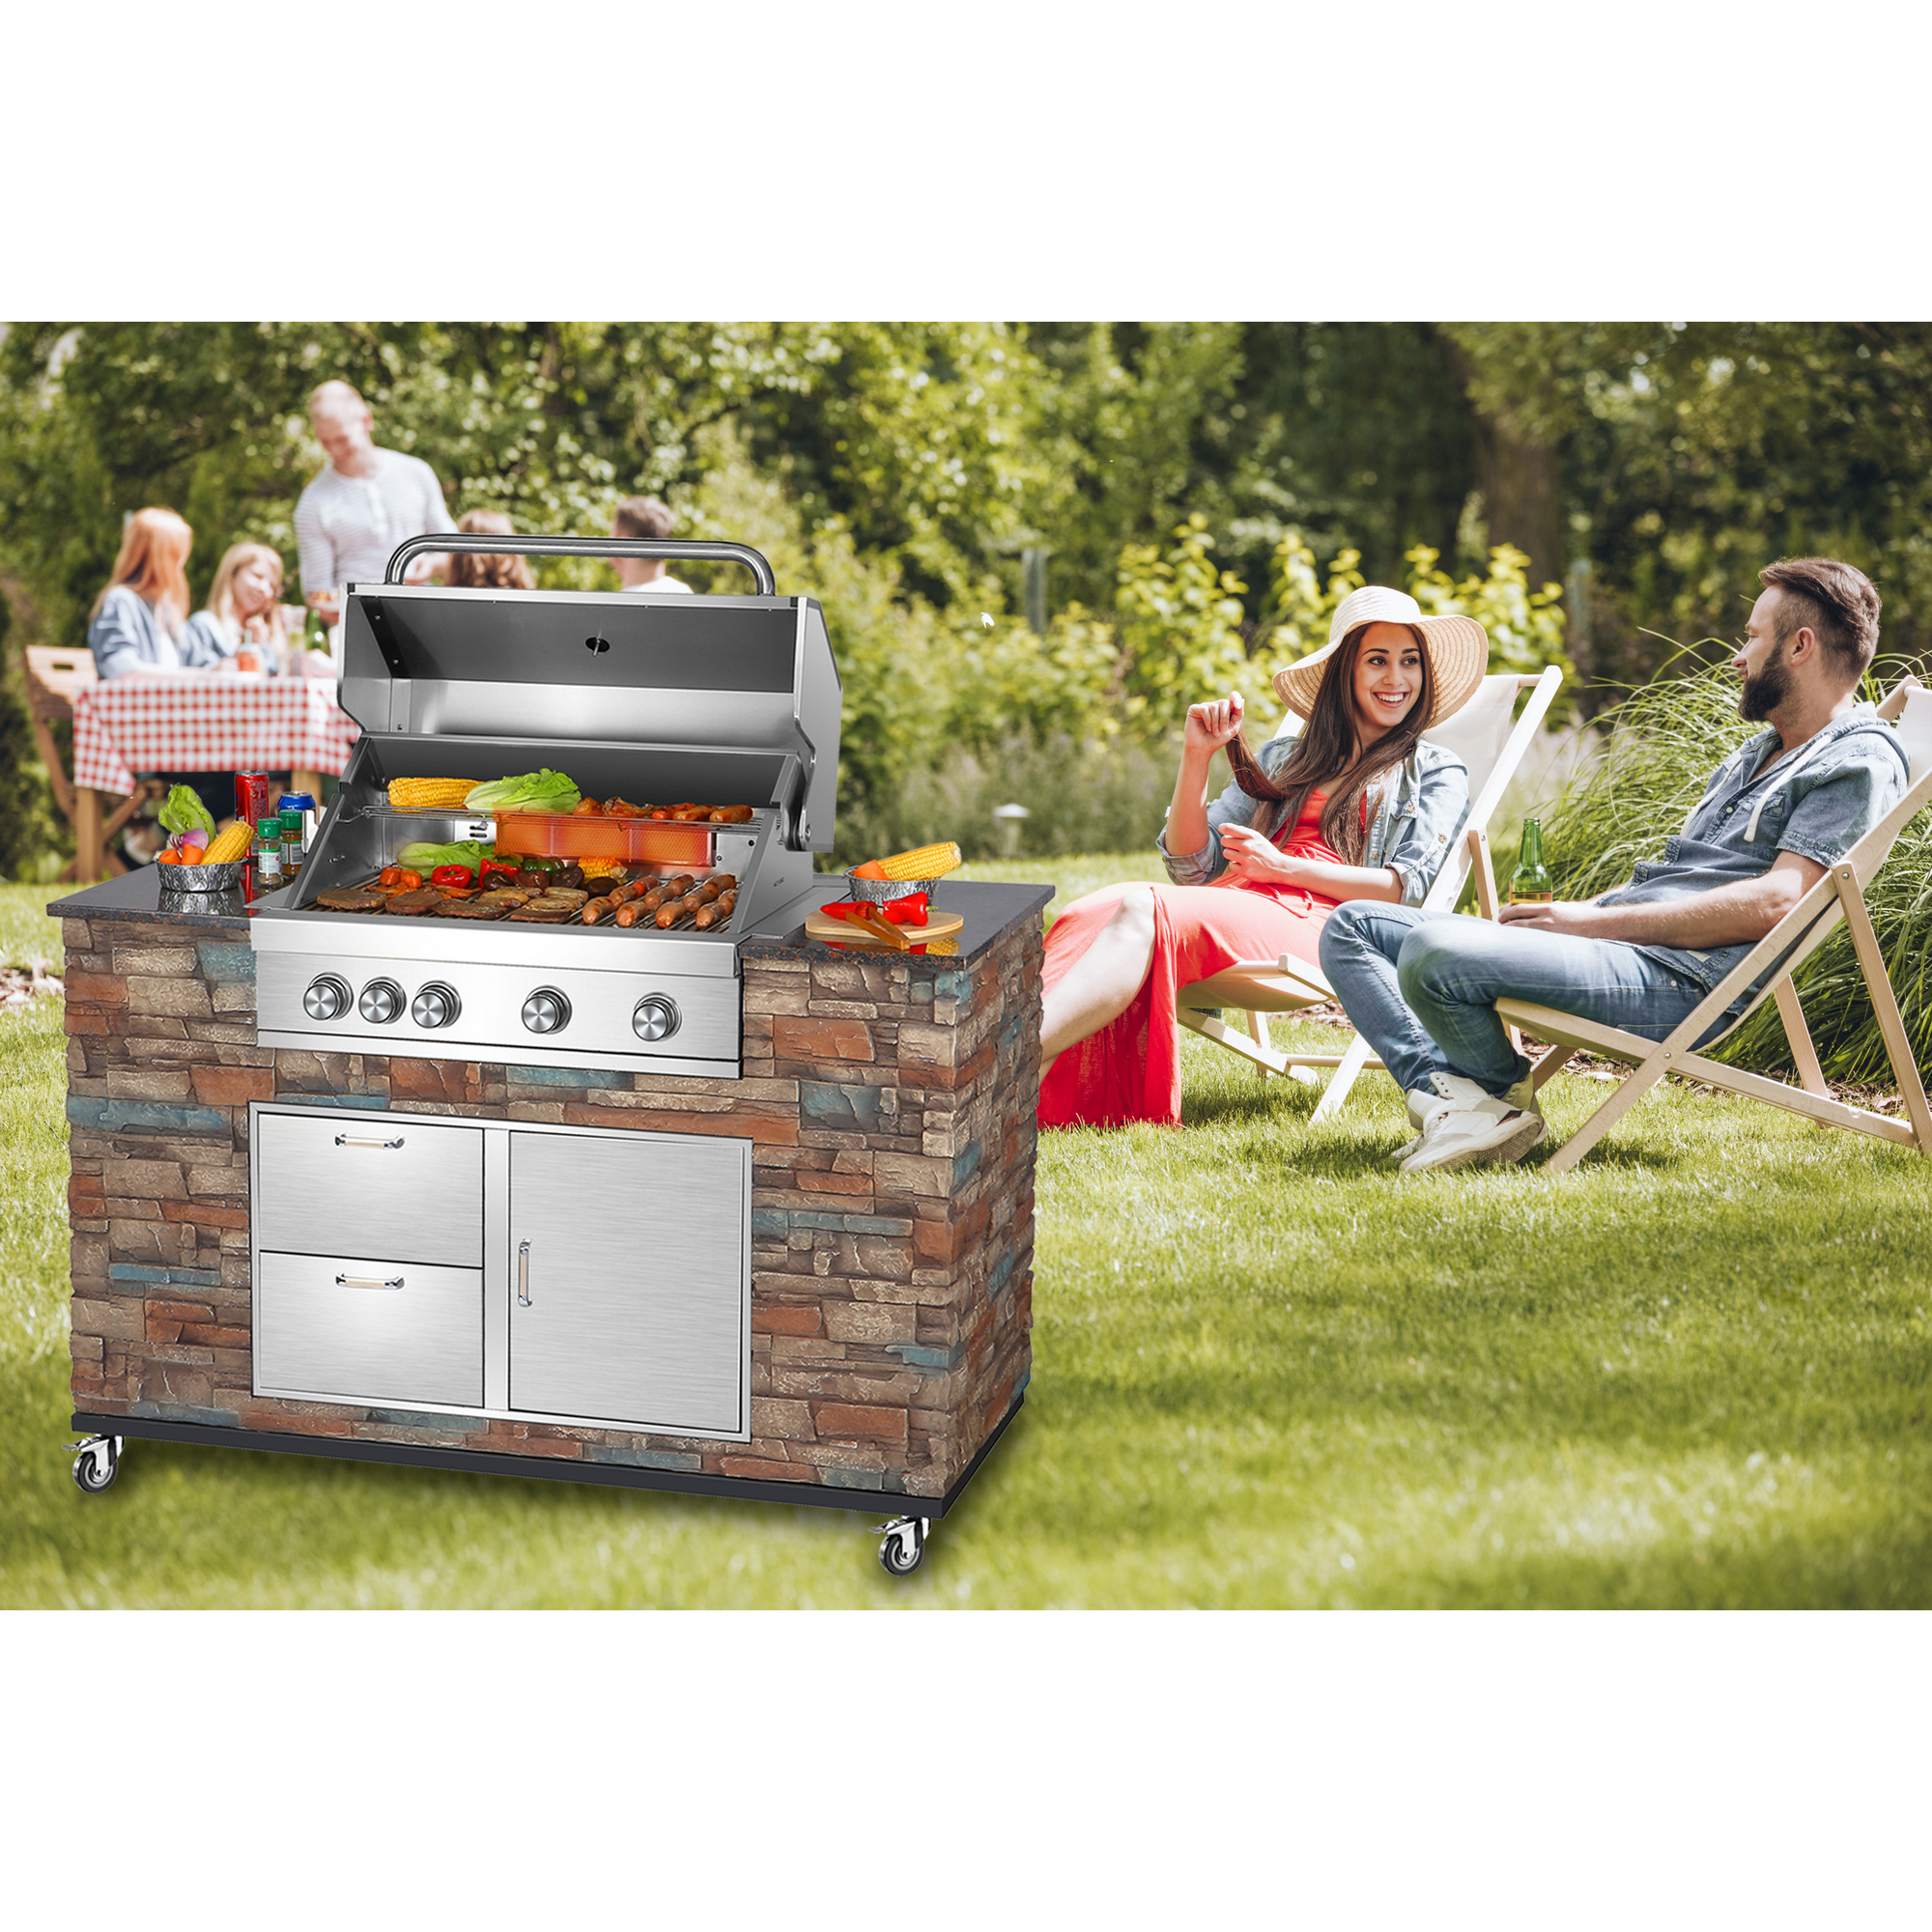 Outdoor Grillküche silber 130 x 147 x 68 cm + product picture